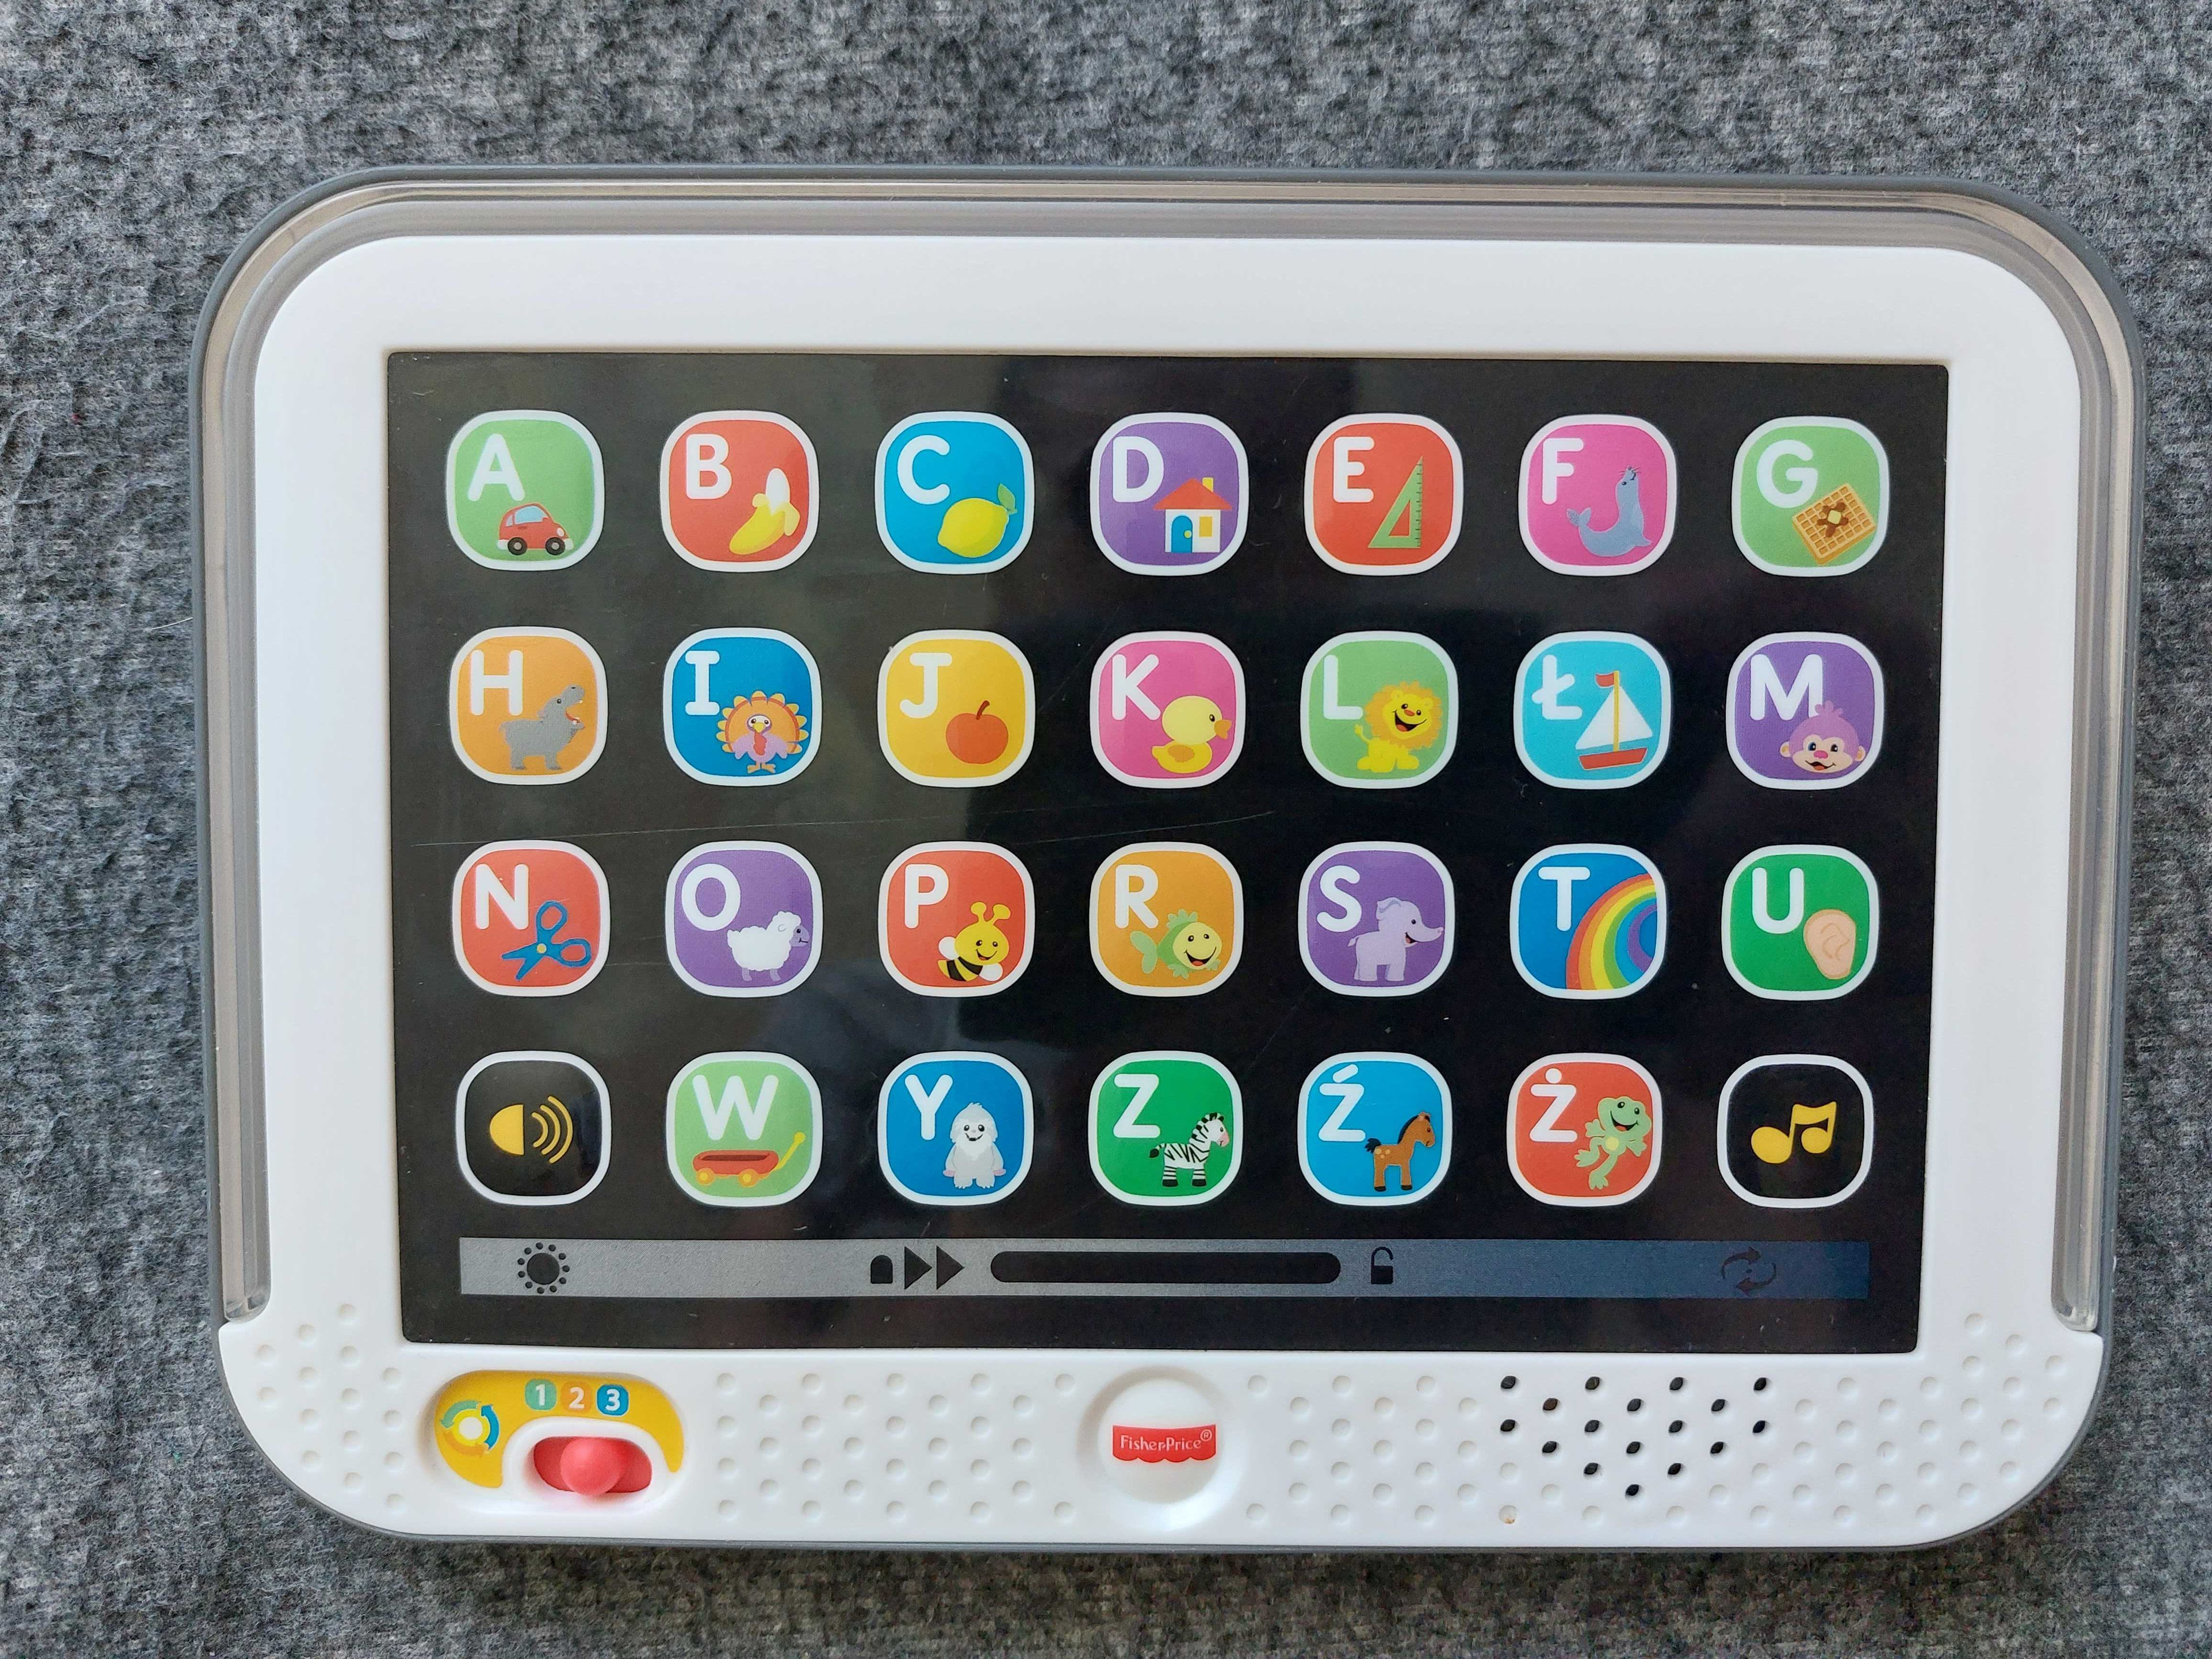 Tablet Fisher Price